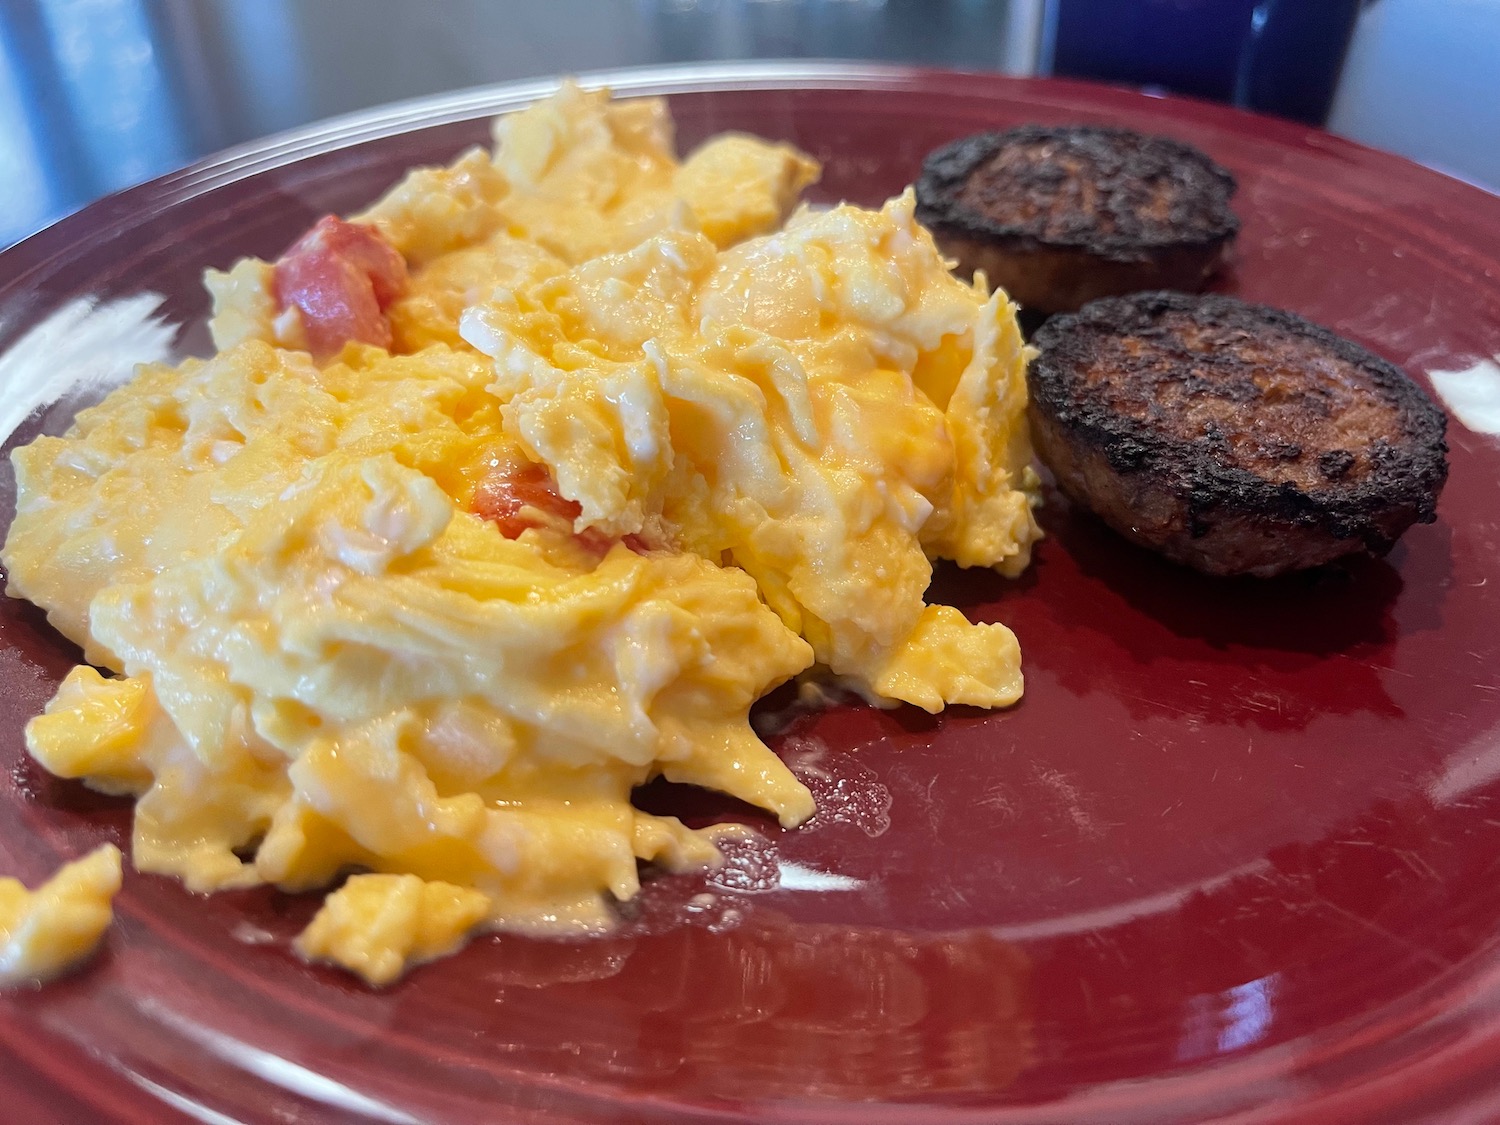 a plate of scrambled eggs and meatballs